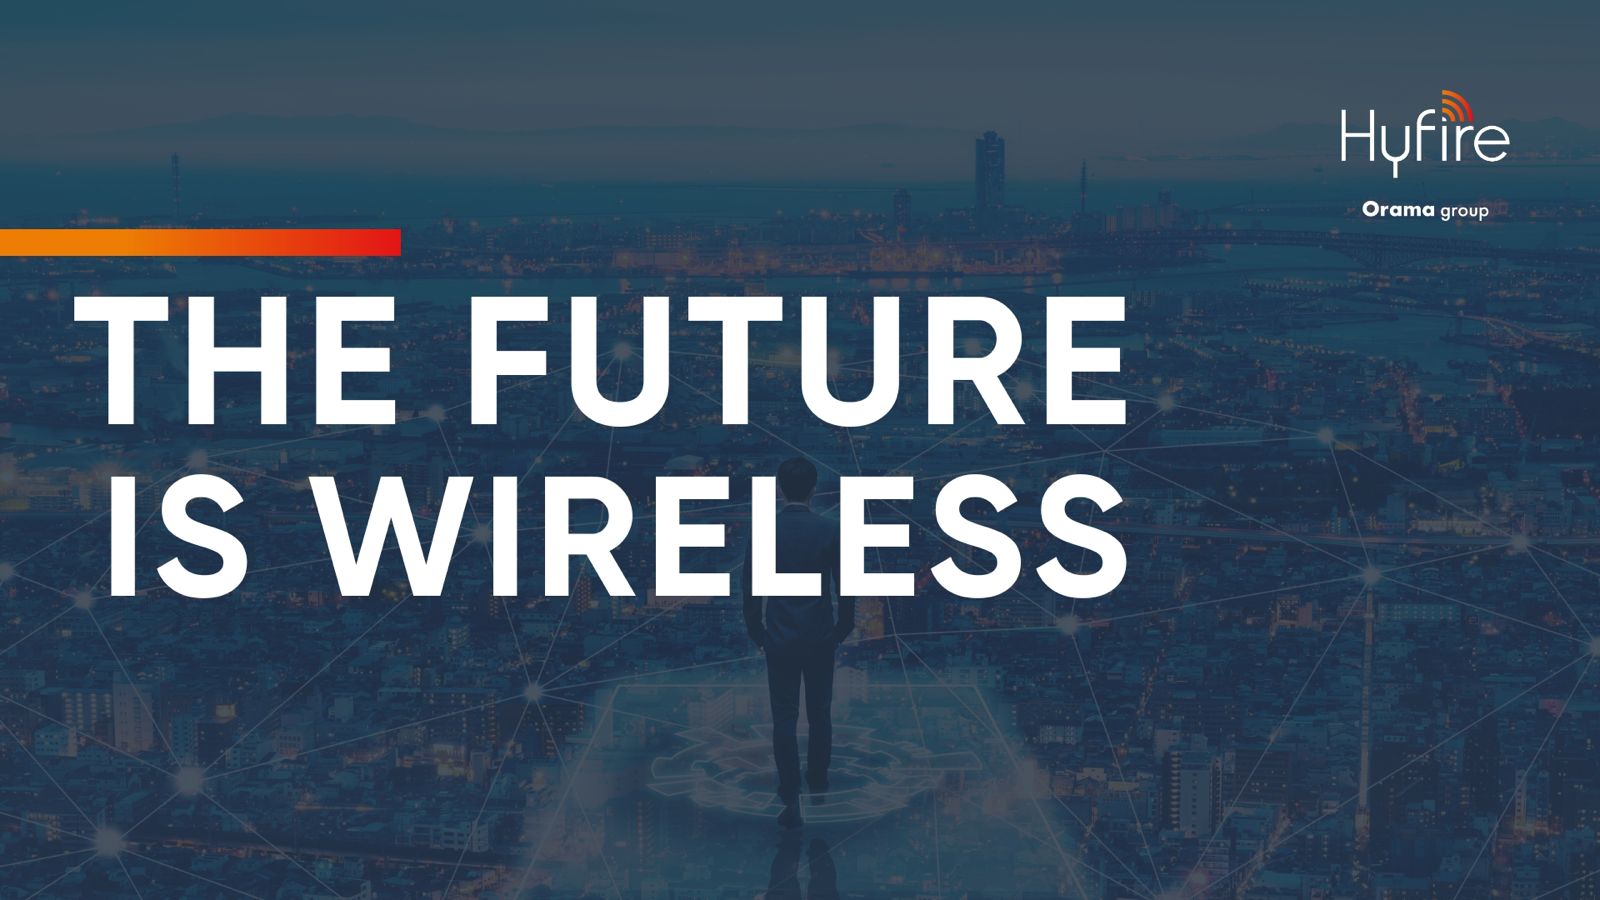 The future is wireless